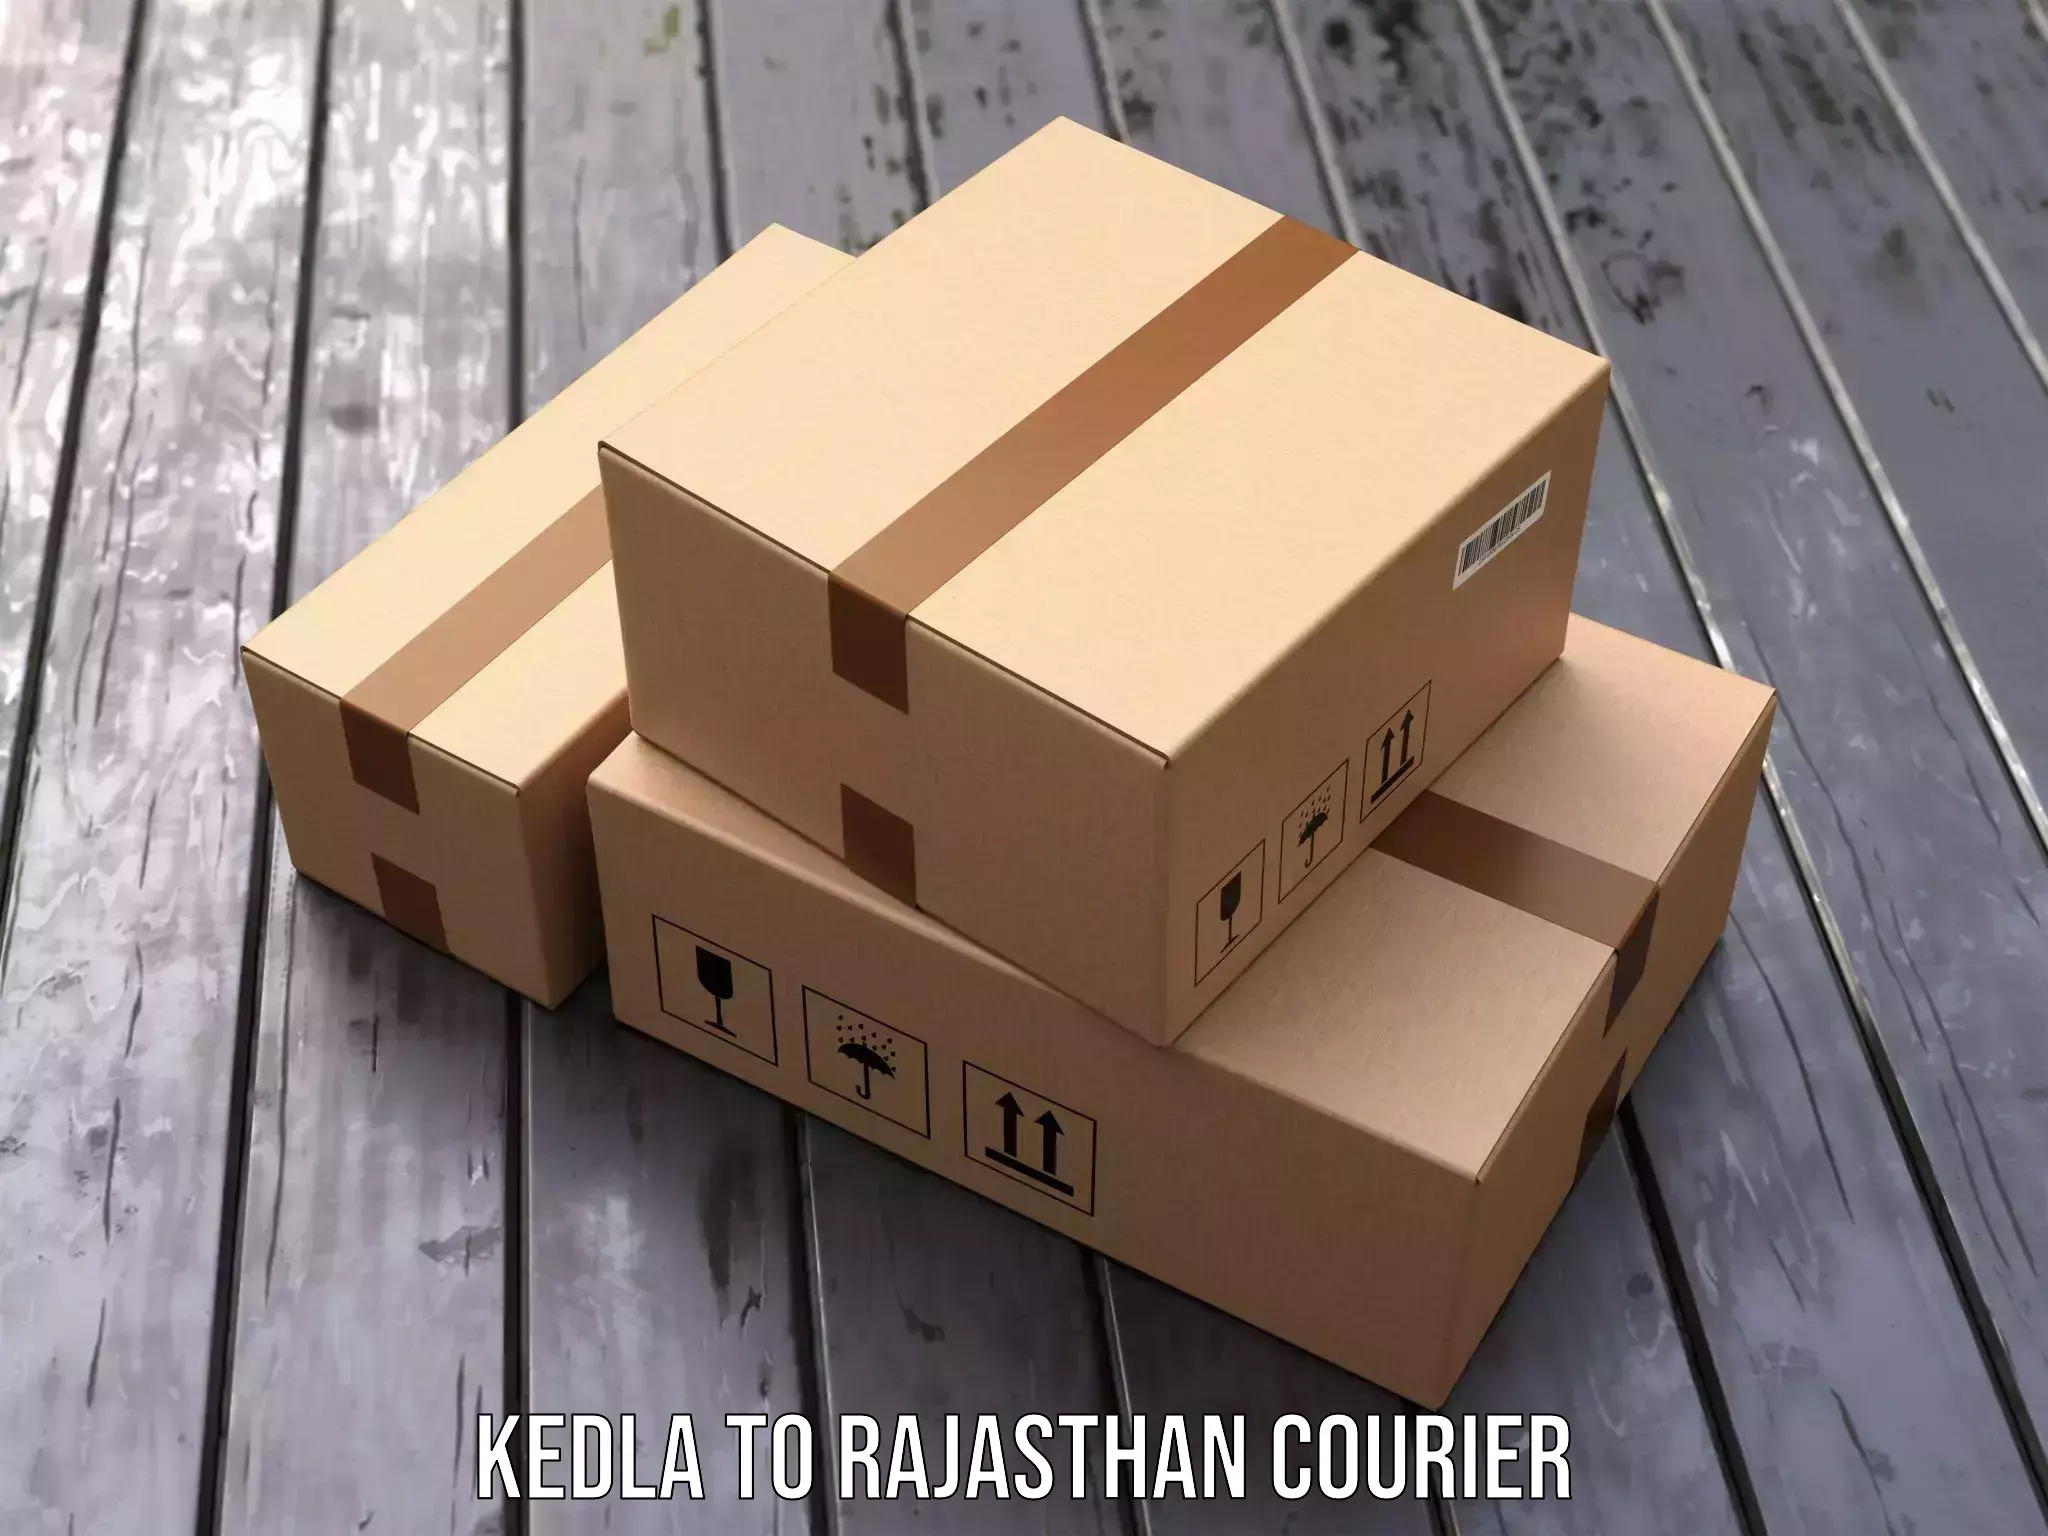 End-to-end delivery Kedla to Jaipur